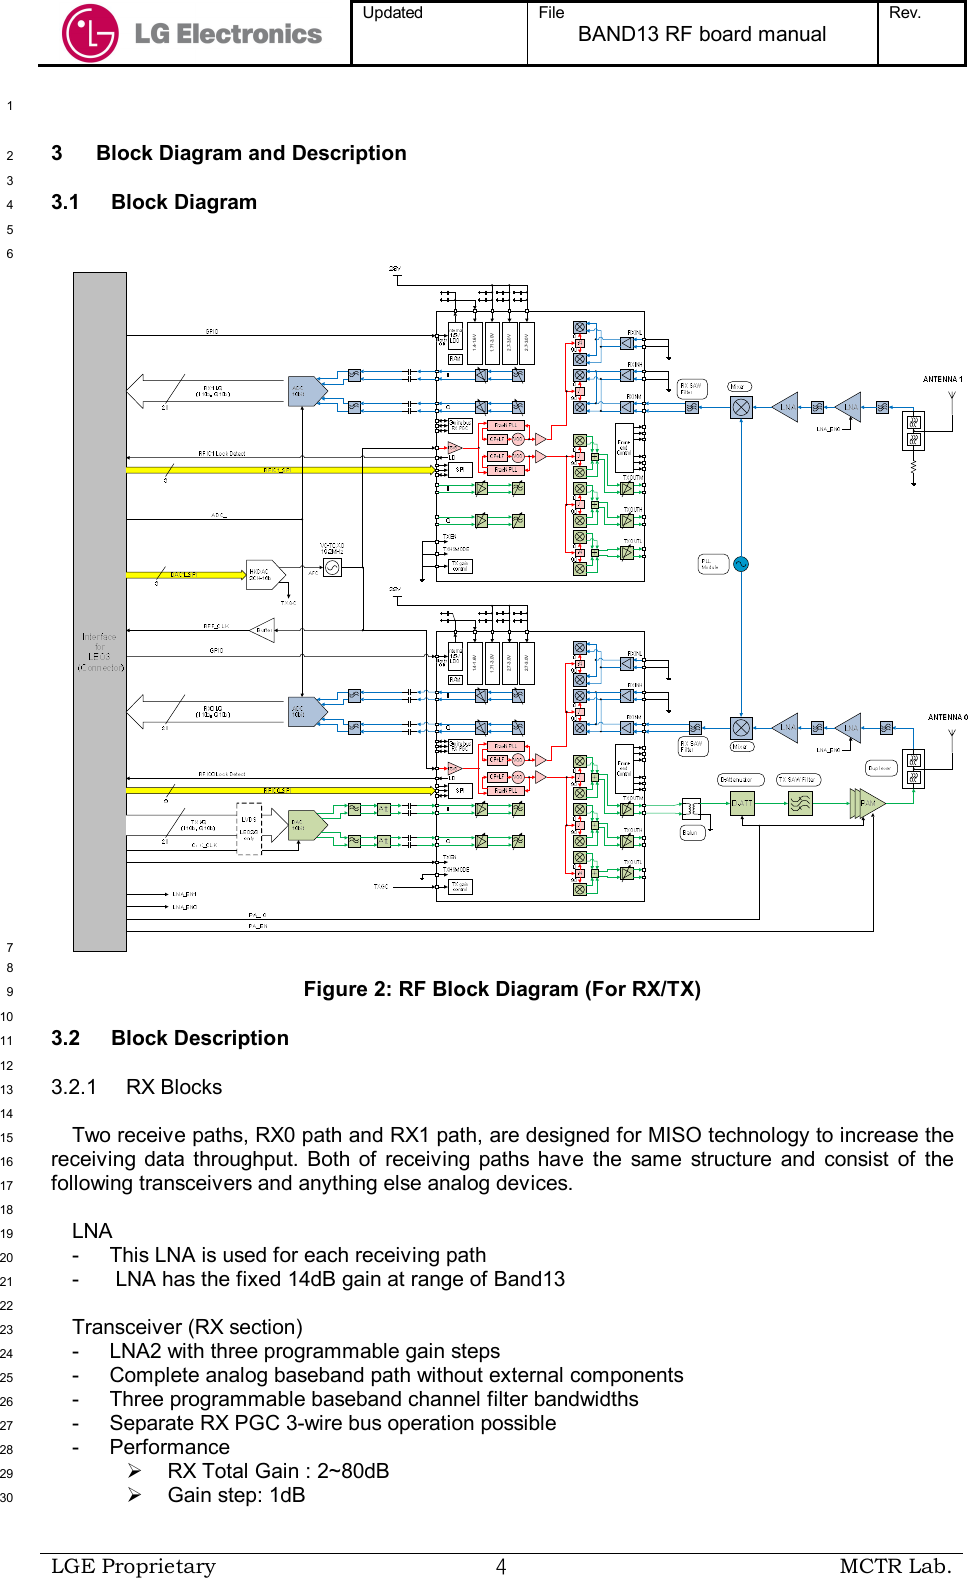  Updated  File BAND13 RF board manual Rev.    LGE Proprietary  ４ MCTR Lab.   1 3  Block Diagram and Description 2  3 3.1  Block Diagram 4  5  6 2.7-3.0V2.7-3.0V 1.71-3.0V1.4-1.6V 2.7-3.0V 2.7-3.0V1.71-3. 0V1.4-1.6V7  8 Figure 2: RF Block Diagram (For RX/TX) 9  10 3.2  Block Description 11  12 3.2.1  RX Blocks 13  14 Two receive paths, RX0 path and RX1 path, are designed for MISO technology to increase the 15 receiving  data  throughput.  Both of receiving paths  have  the  same  structure  and  consist  of  the 16 following transceivers and anything else analog devices. 17  18 LNA 19 -  This LNA is used for each receiving path 20 -   LNA has the fixed 14dB gain at range of Band13 21  22 Transceiver (RX section) 23 -  LNA2 with three programmable gain steps 24 -  Complete analog baseband path without external components 25 -  Three programmable baseband channel filter bandwidths 26 -  Separate RX PGC 3-wire bus operation possible 27 -  Performance 28   RX Total Gain : 2~80dB 29   Gain step: 1dB  30 